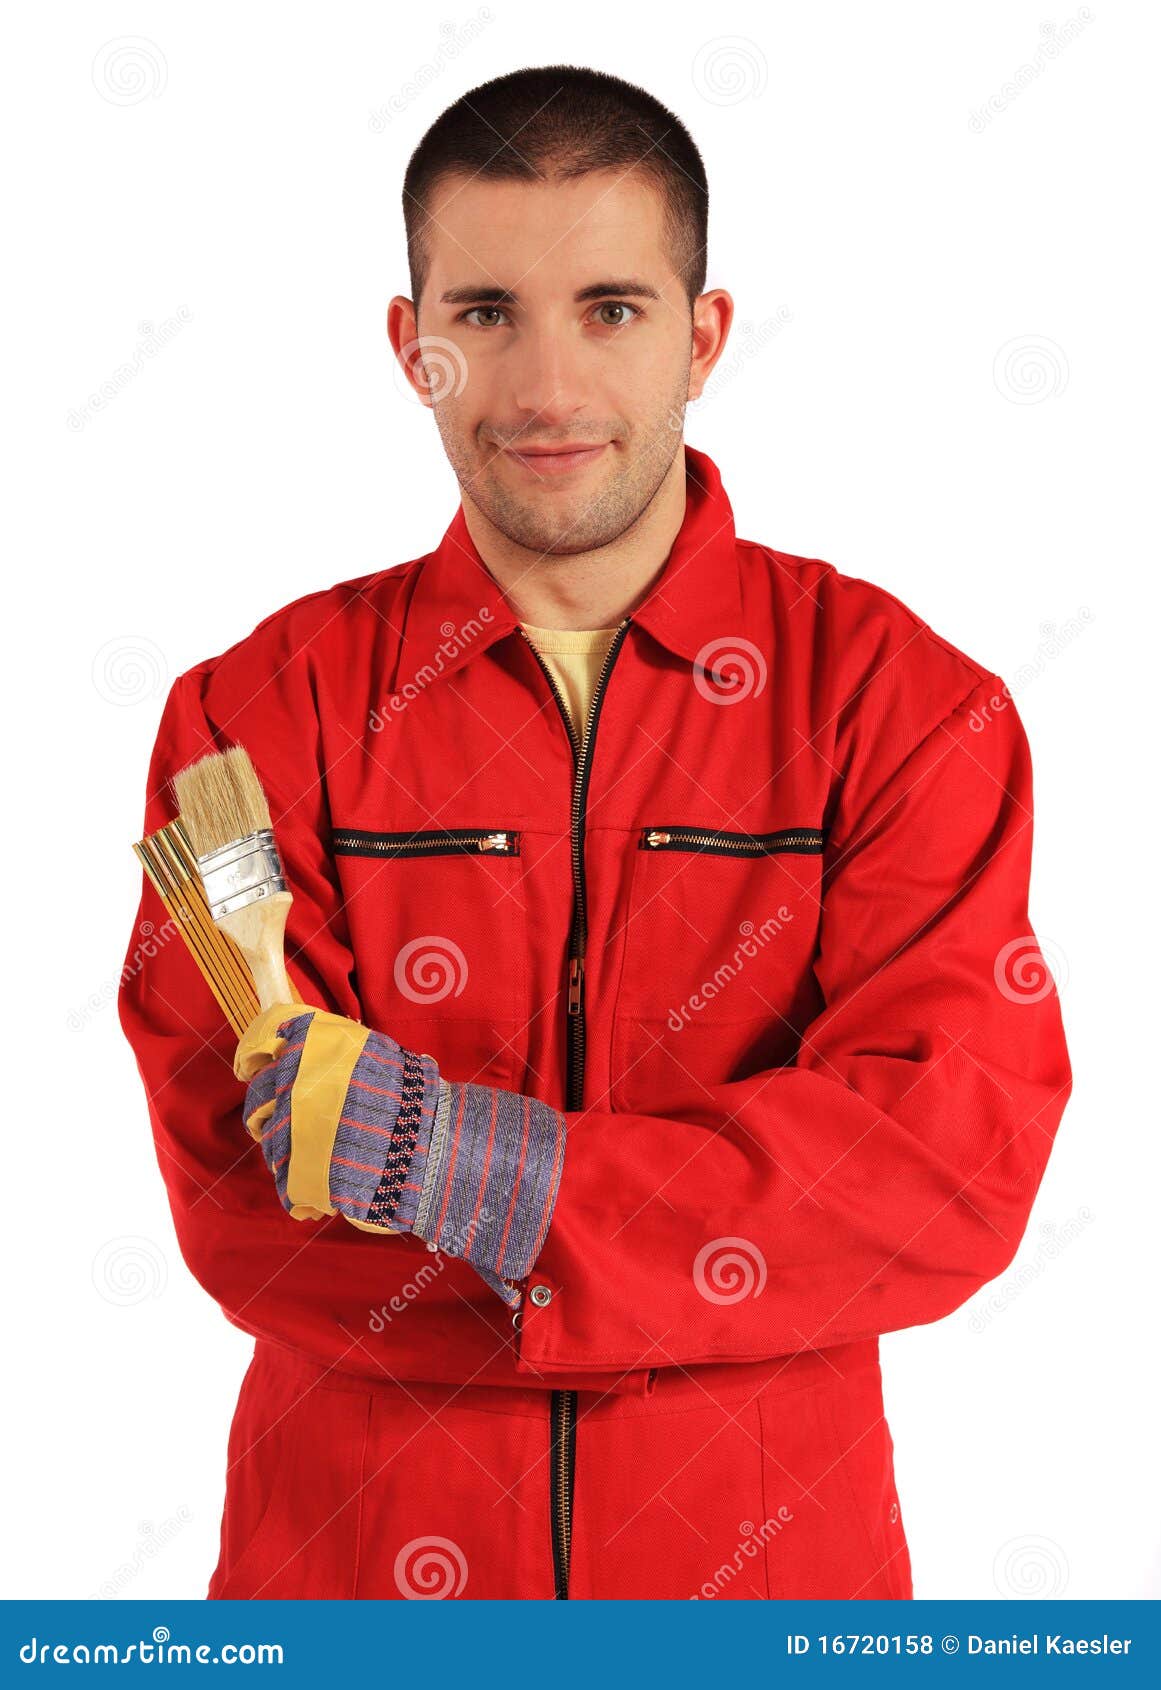 painter in red overall